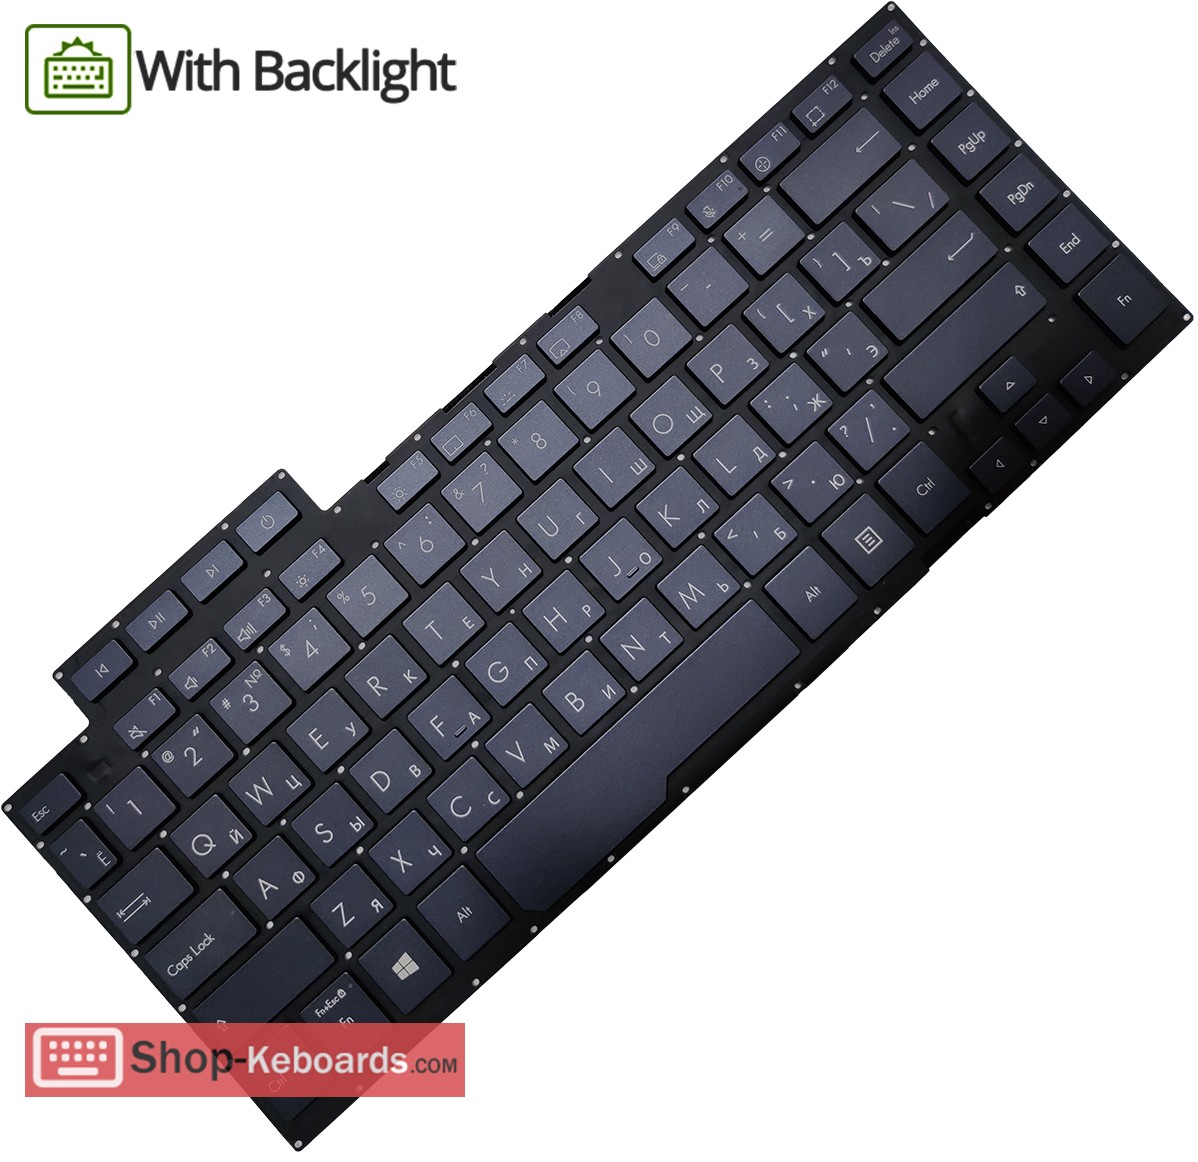 Asus 0KNB0-4611BE00  Keyboard replacement